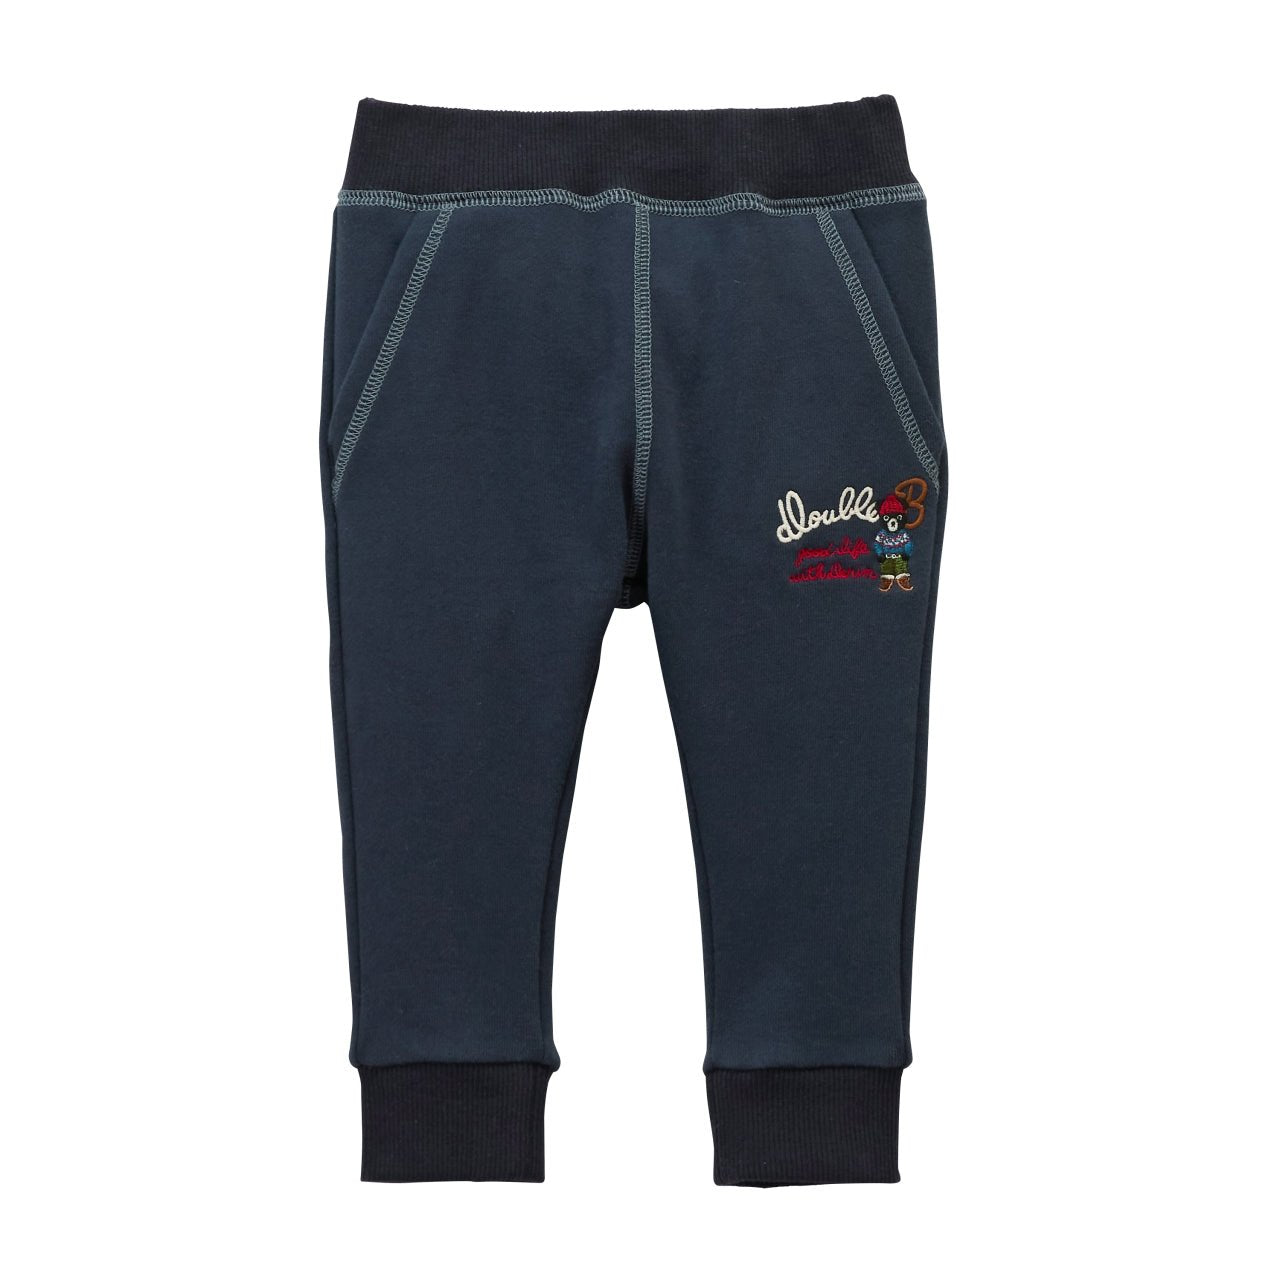 2t pants sweats and winter jeans boys - Boys tops & t-shirts